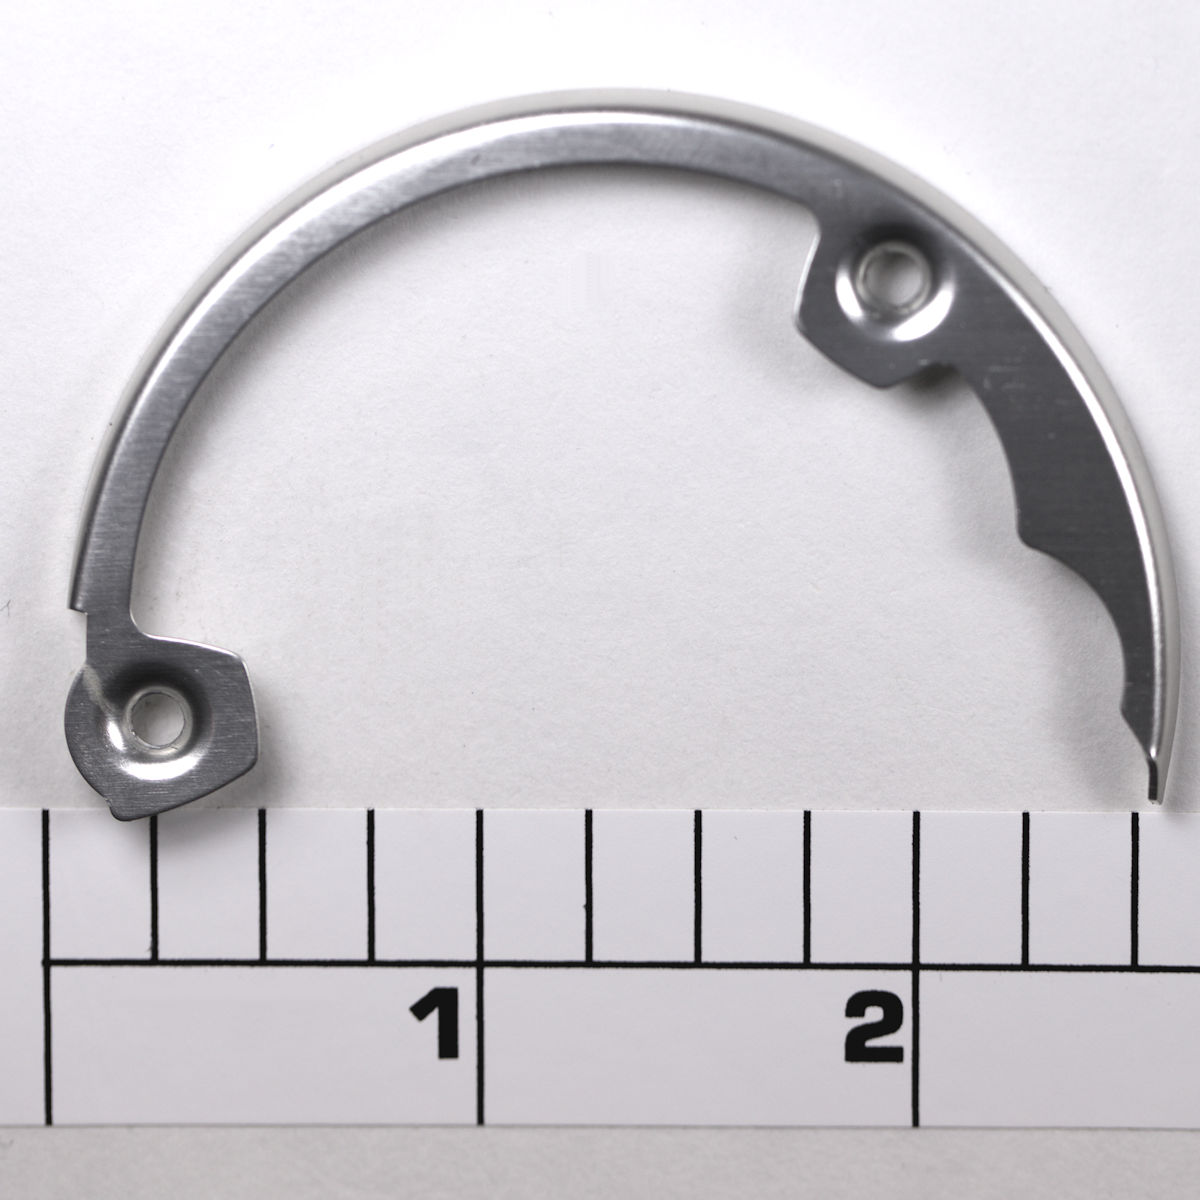 2-RVL15LWLCLH Ring, Handle Side Ring (Left Hand)